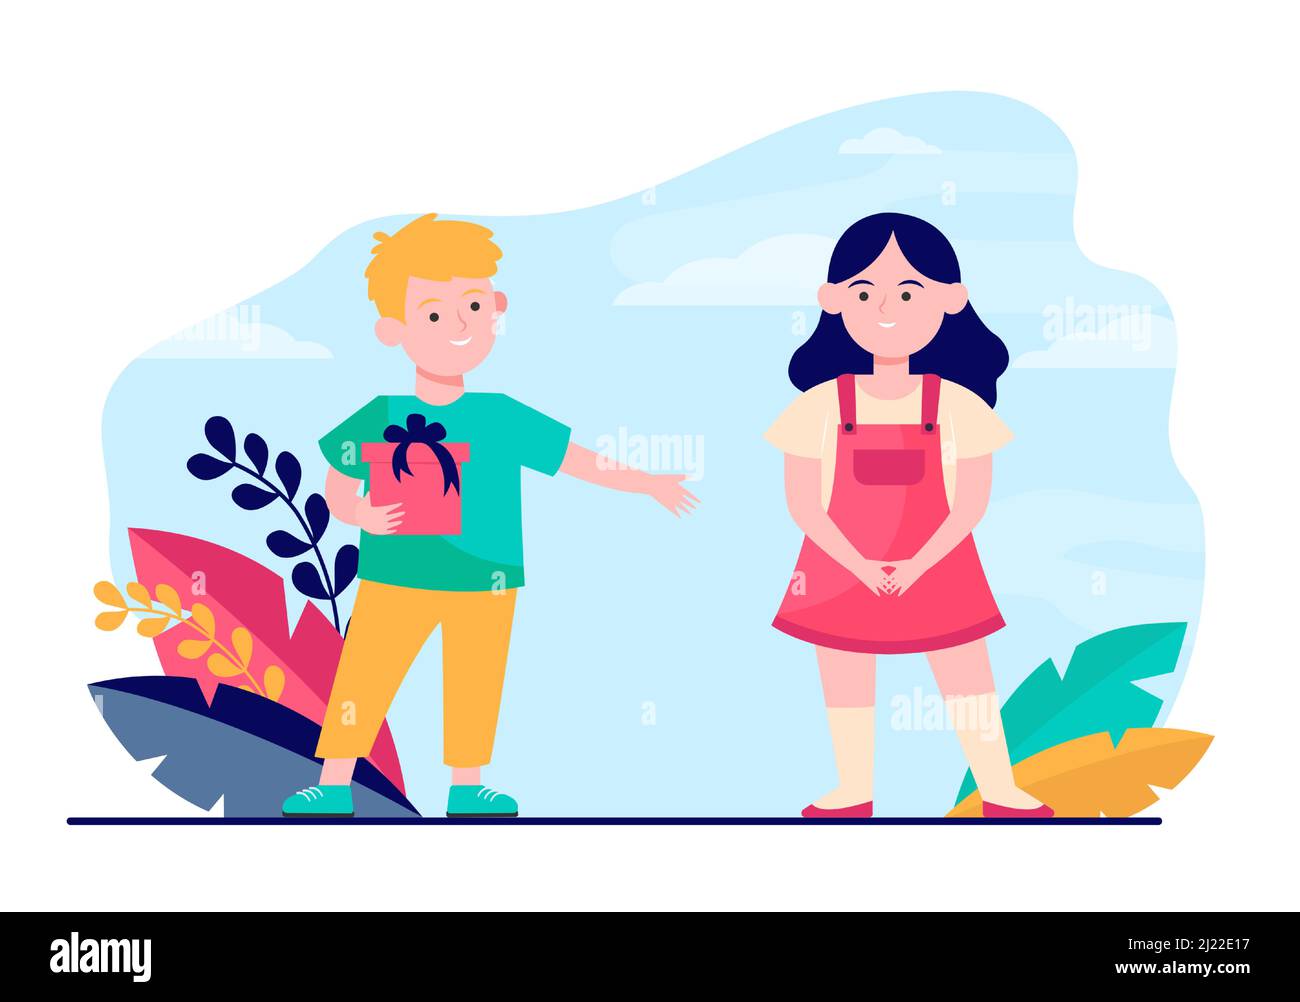 Boy giving gift to girl. Couple of children playing date flat vector illustration. Role play, childhood, friendship concept for banner, website design Stock Vector